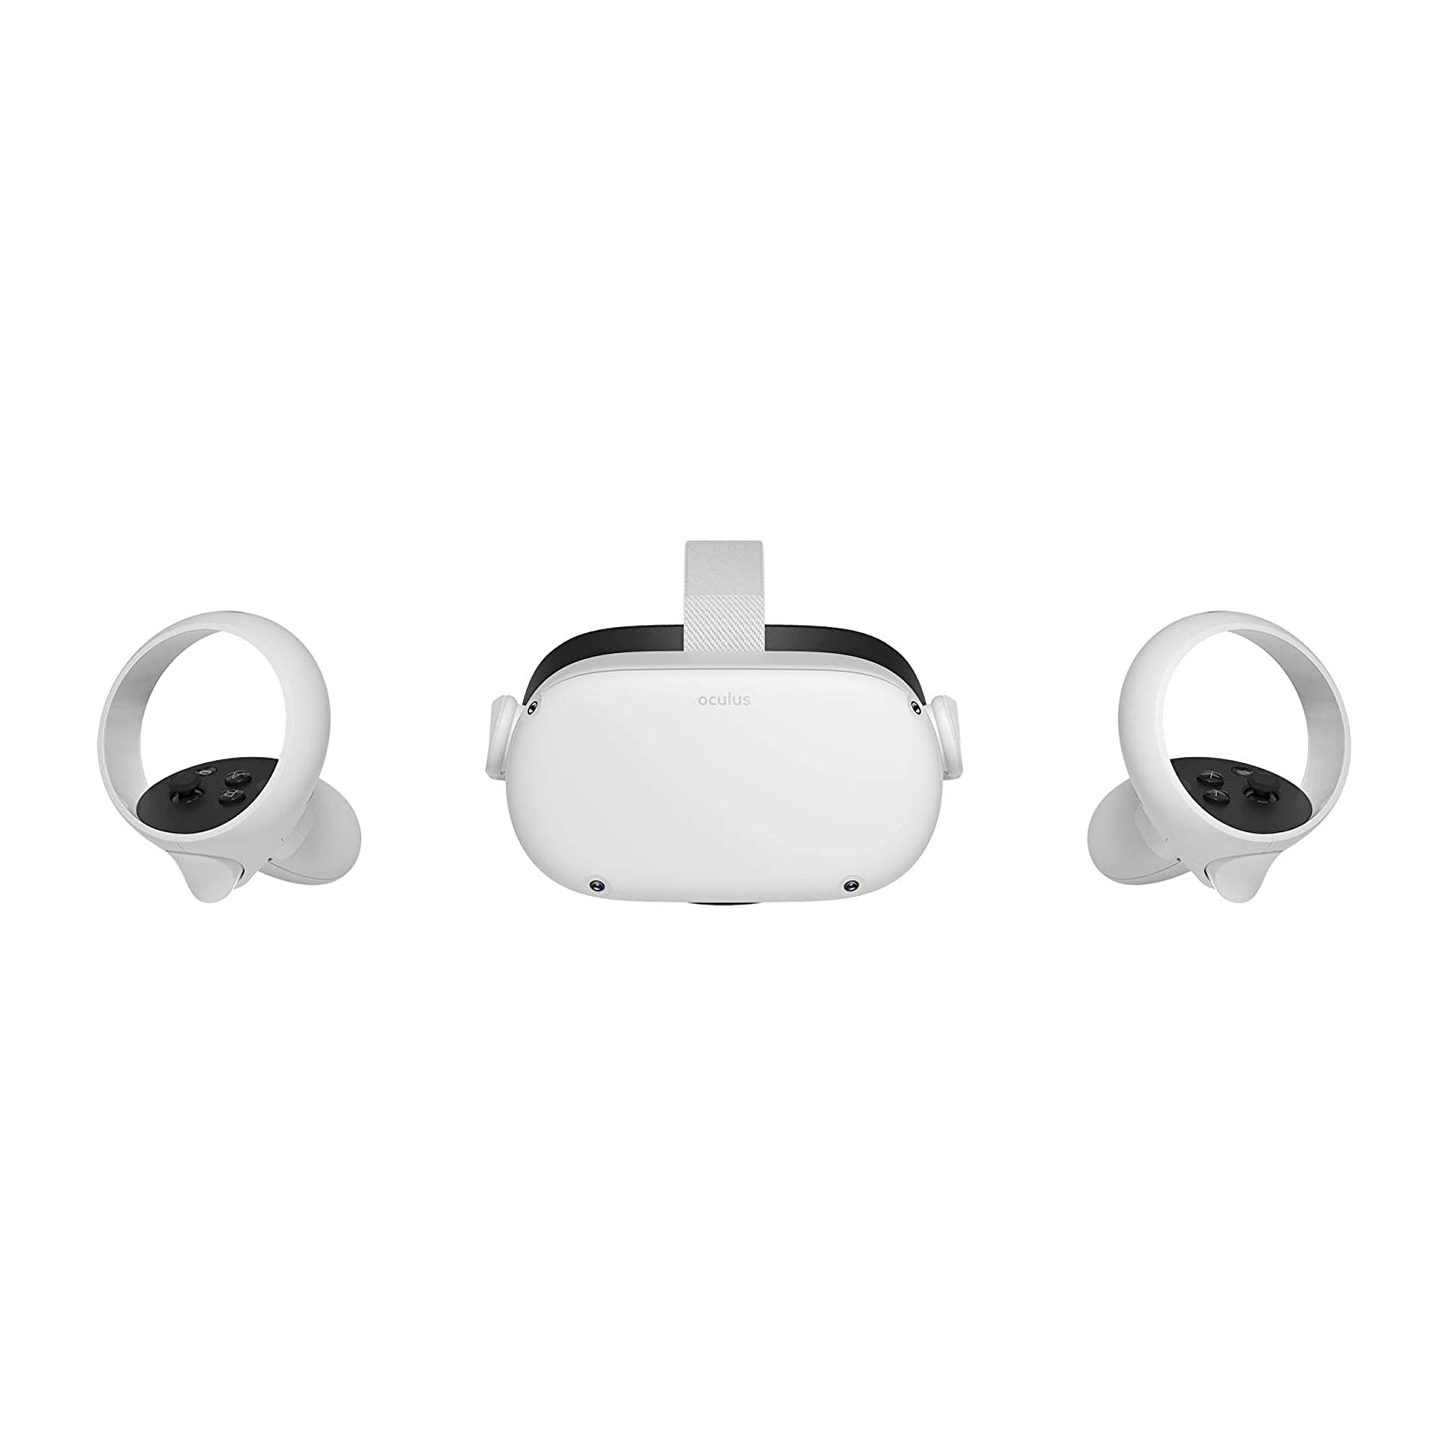 Meta Quest 2 Advanced All-In-One Virtual Reality Headset 256GB